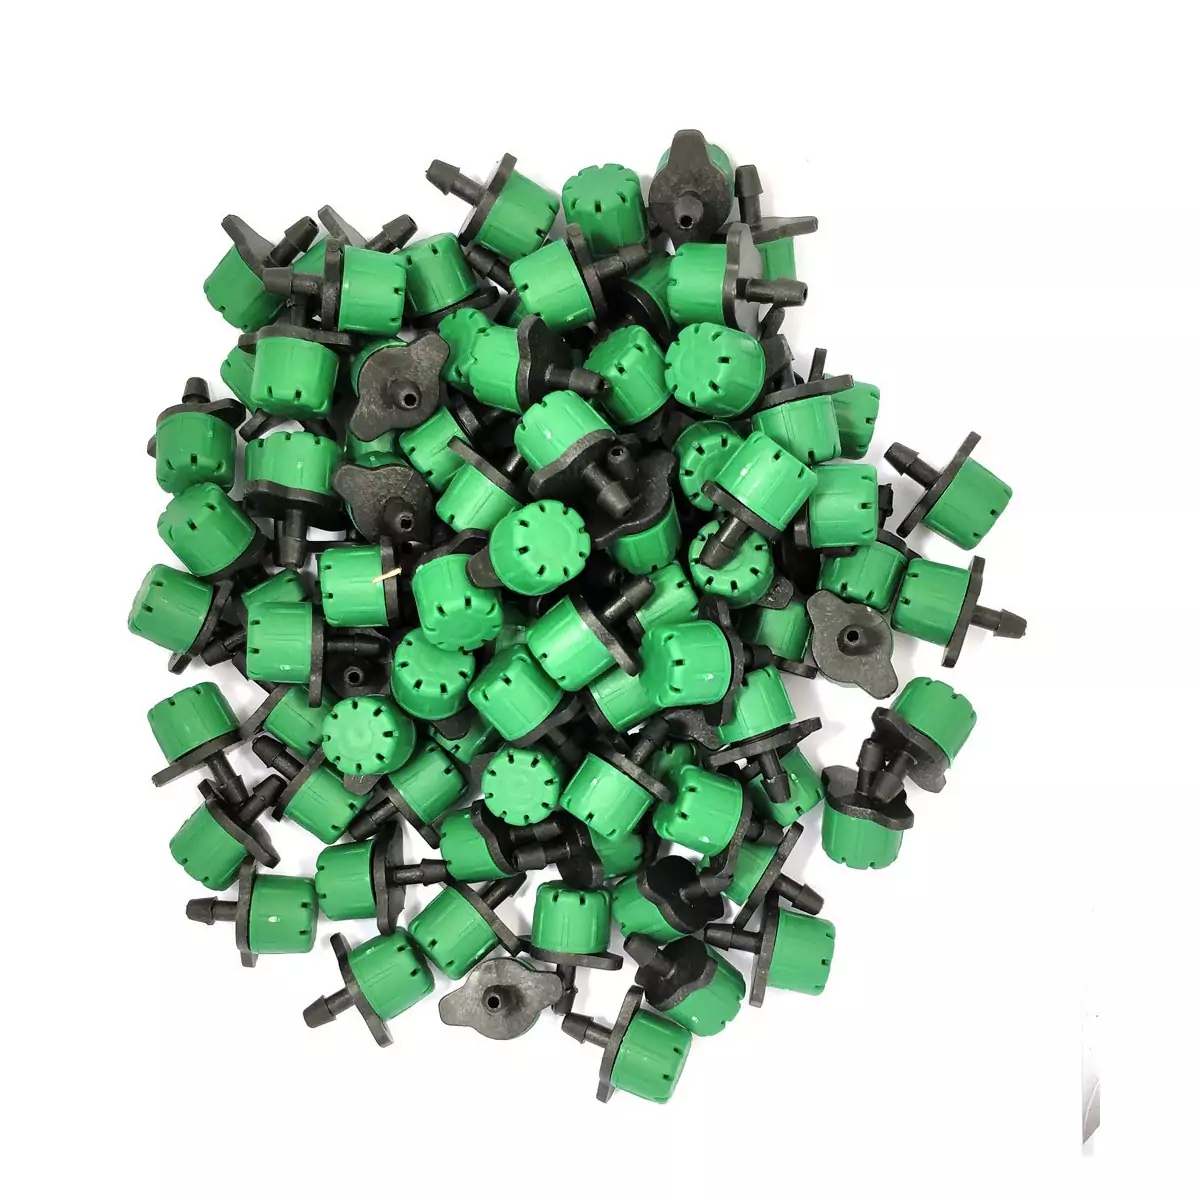 Lot of 100 emitters color green